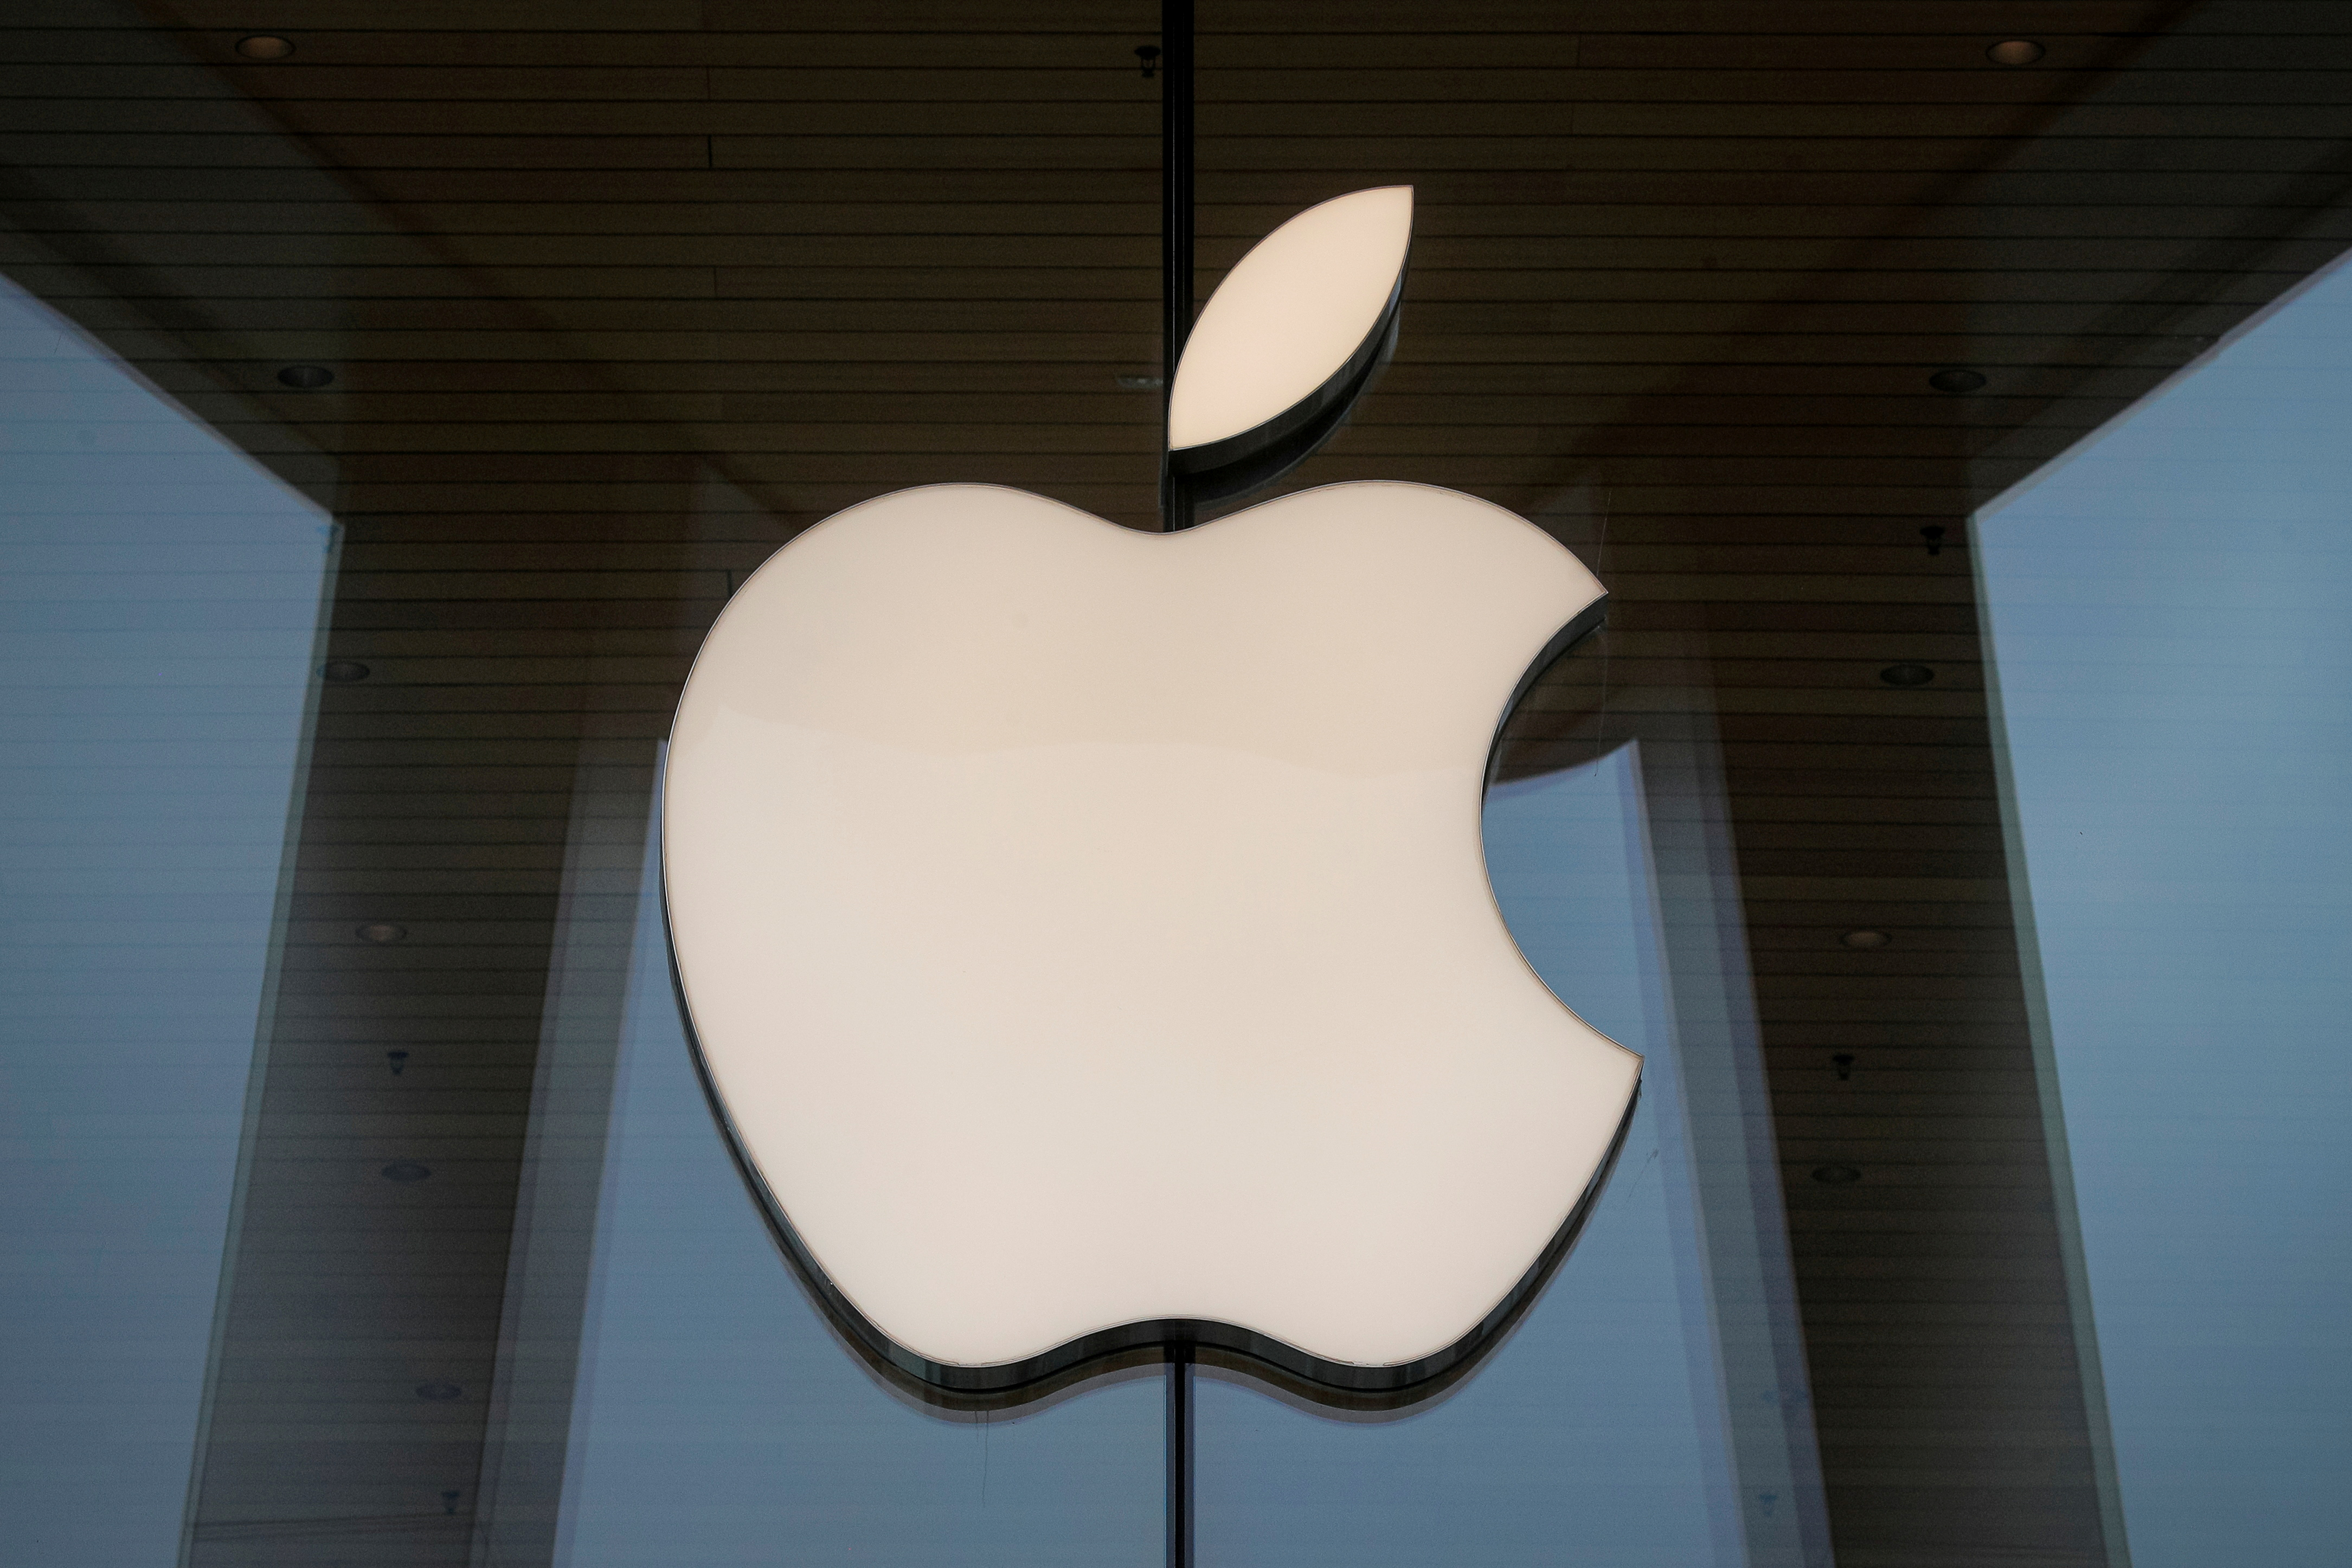 The Apple logo is seen at an Apple Store in Brooklyn